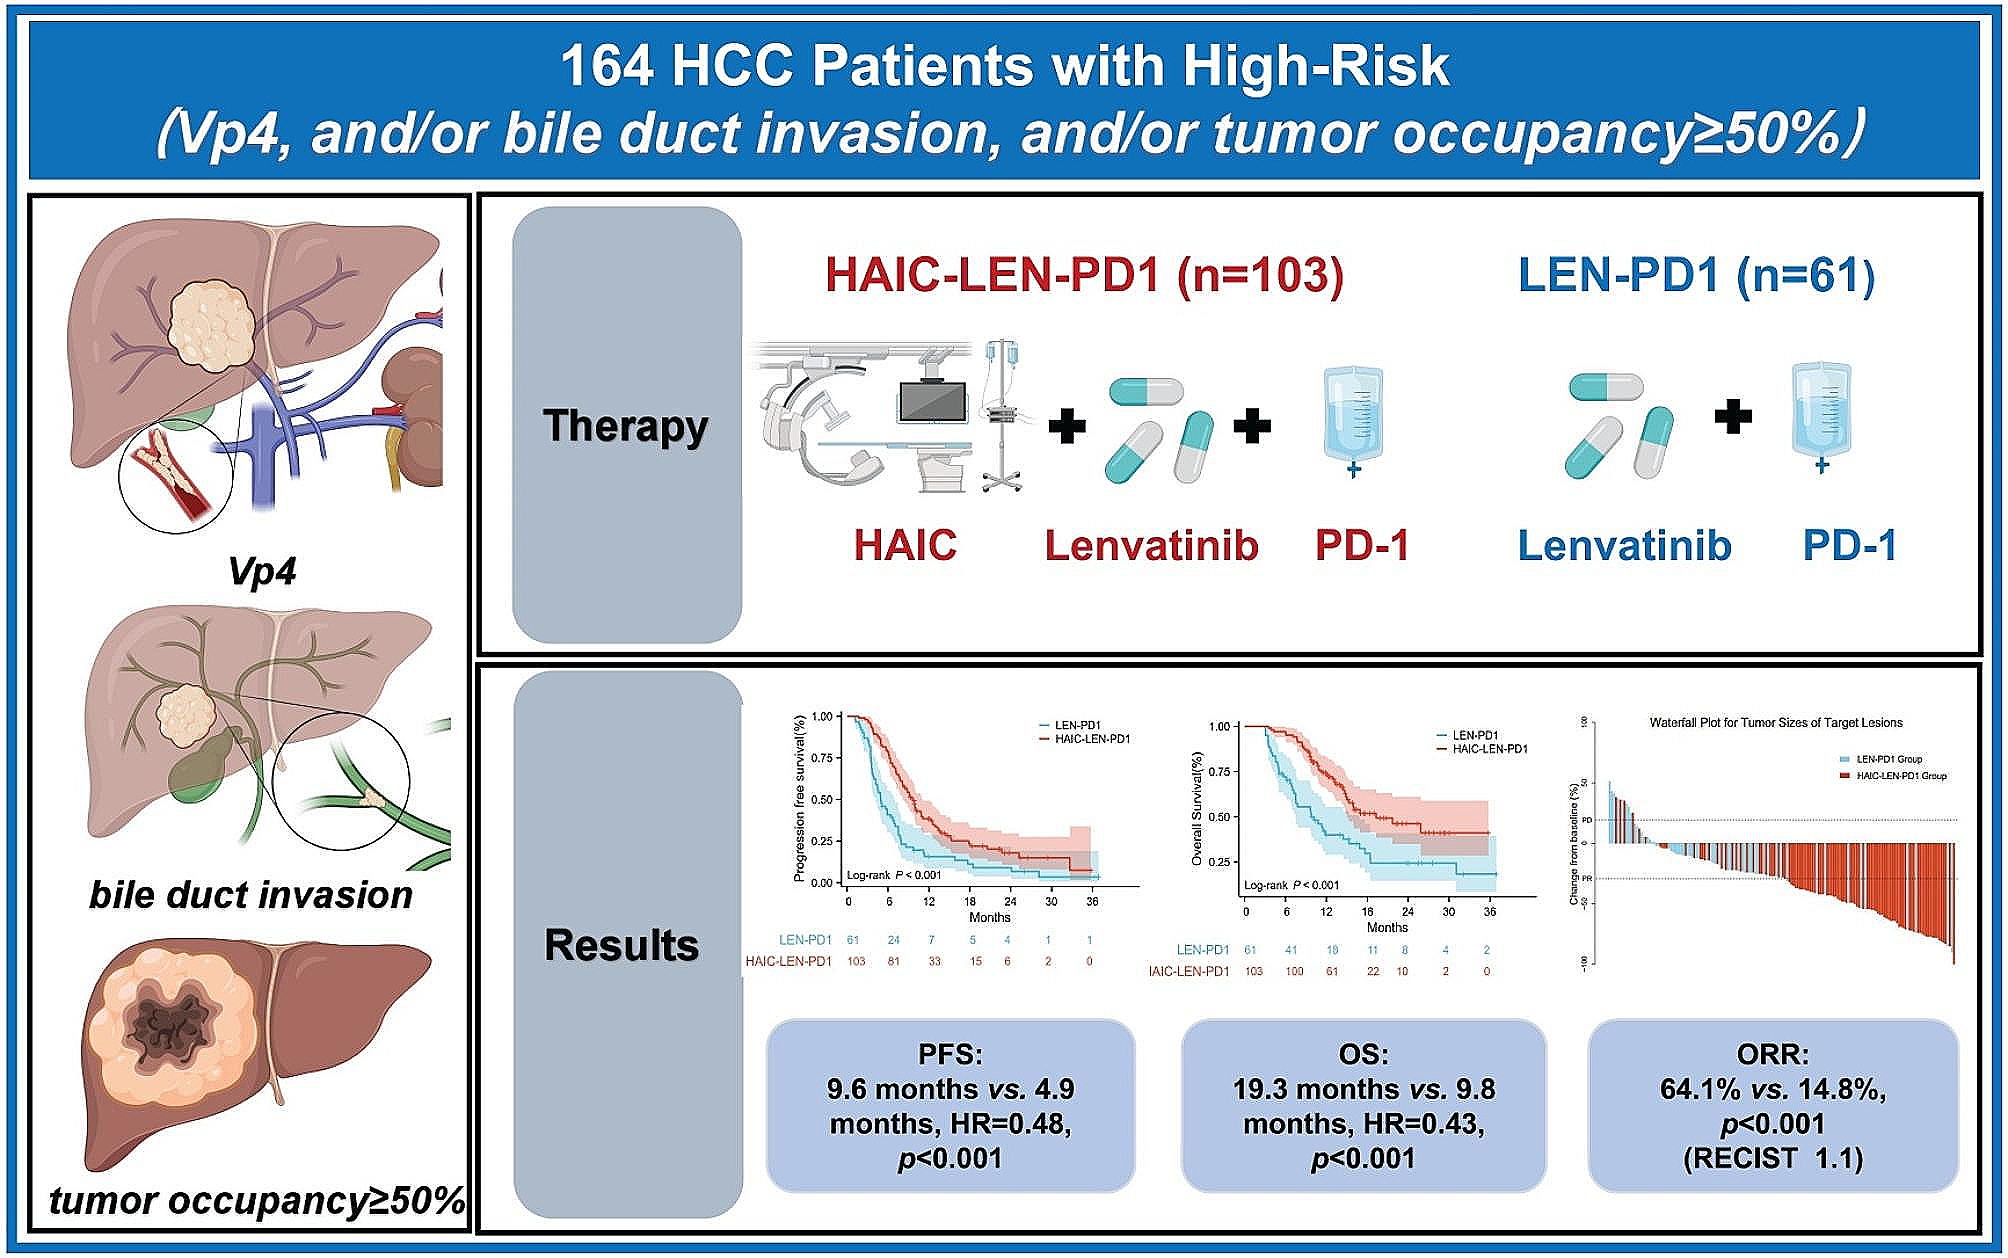 HAIC Combined with lenvatinib plus PD-1 versus lenvatinib Plus PD-1 in patients with high-risk advanced HCC: a real-world study